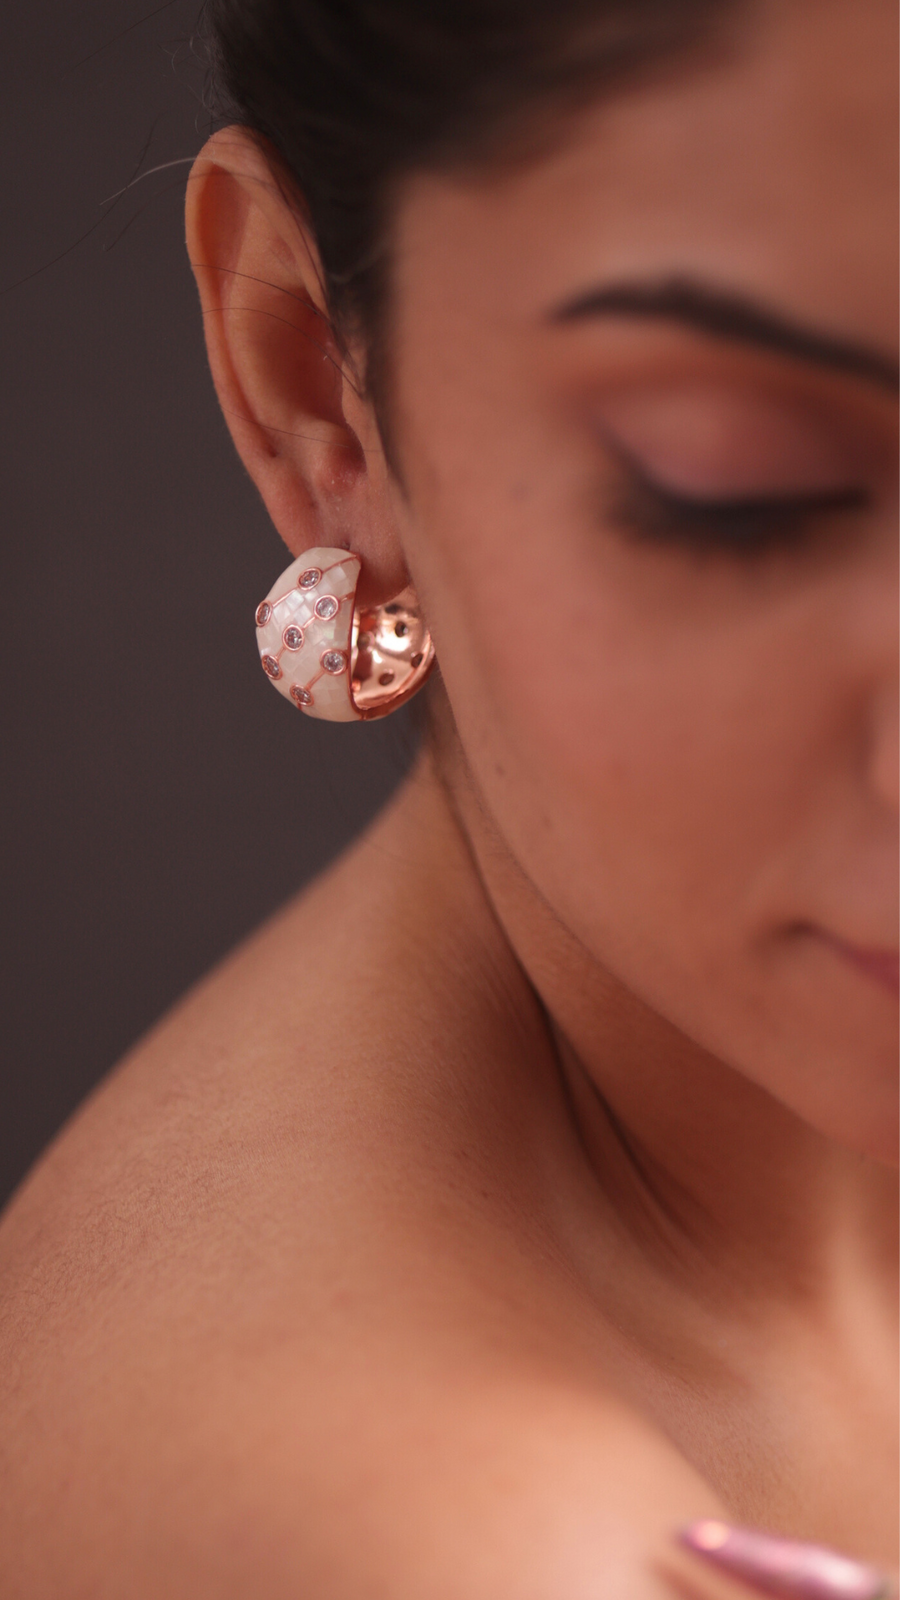 A woman wearing shell earrings, adding a touch of nature-inspired elegance to her outfit.